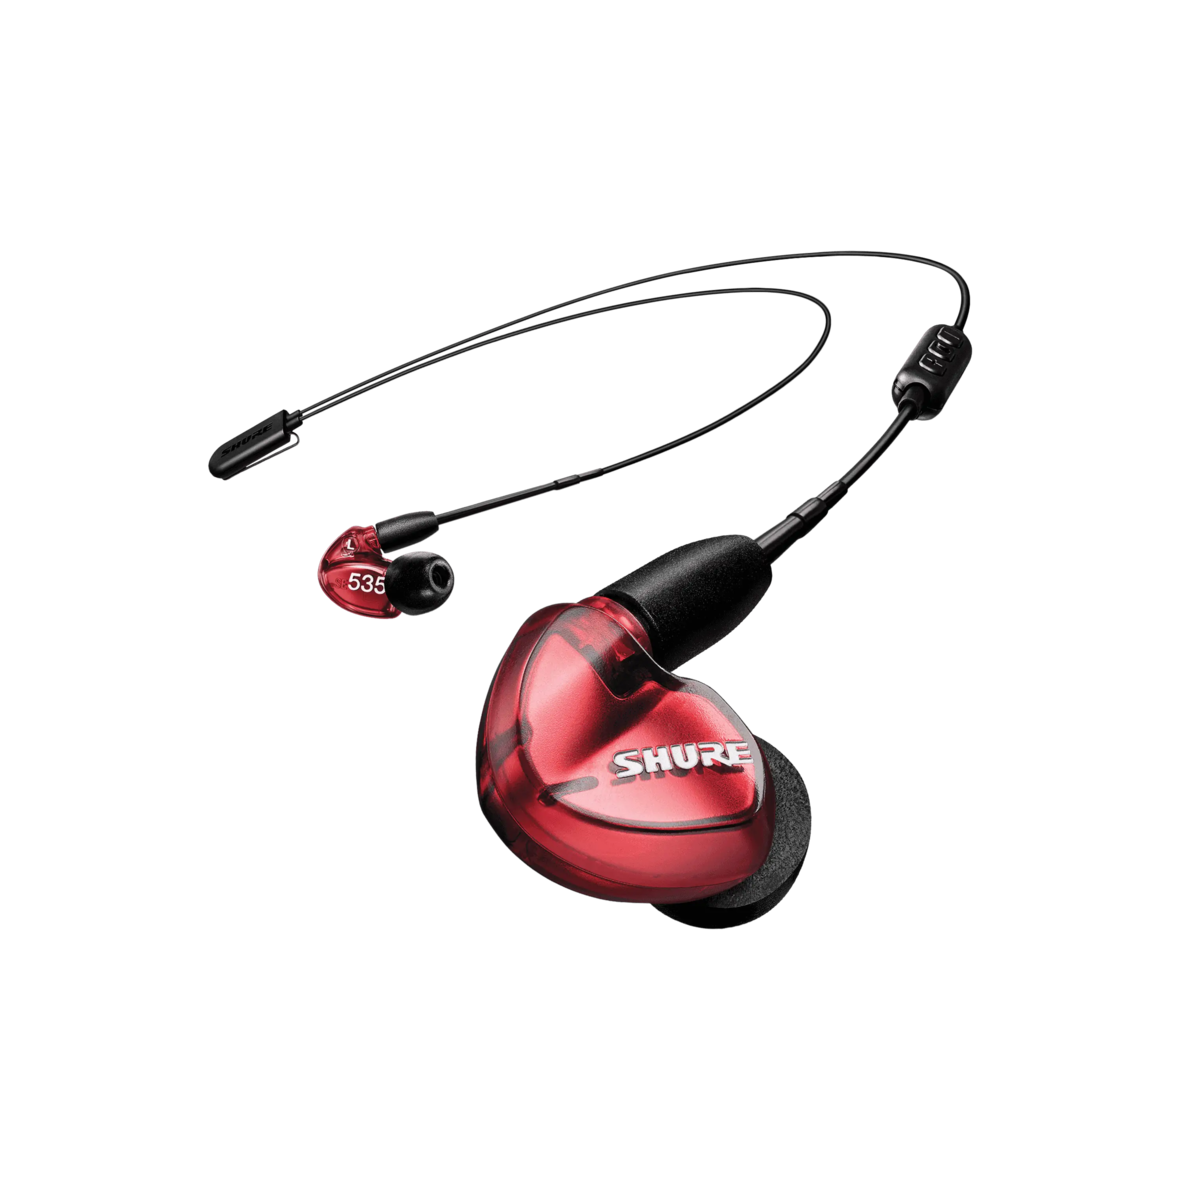 Shure 舒尔| SE535 Limited Edition - Sound Isolating™ Earphones